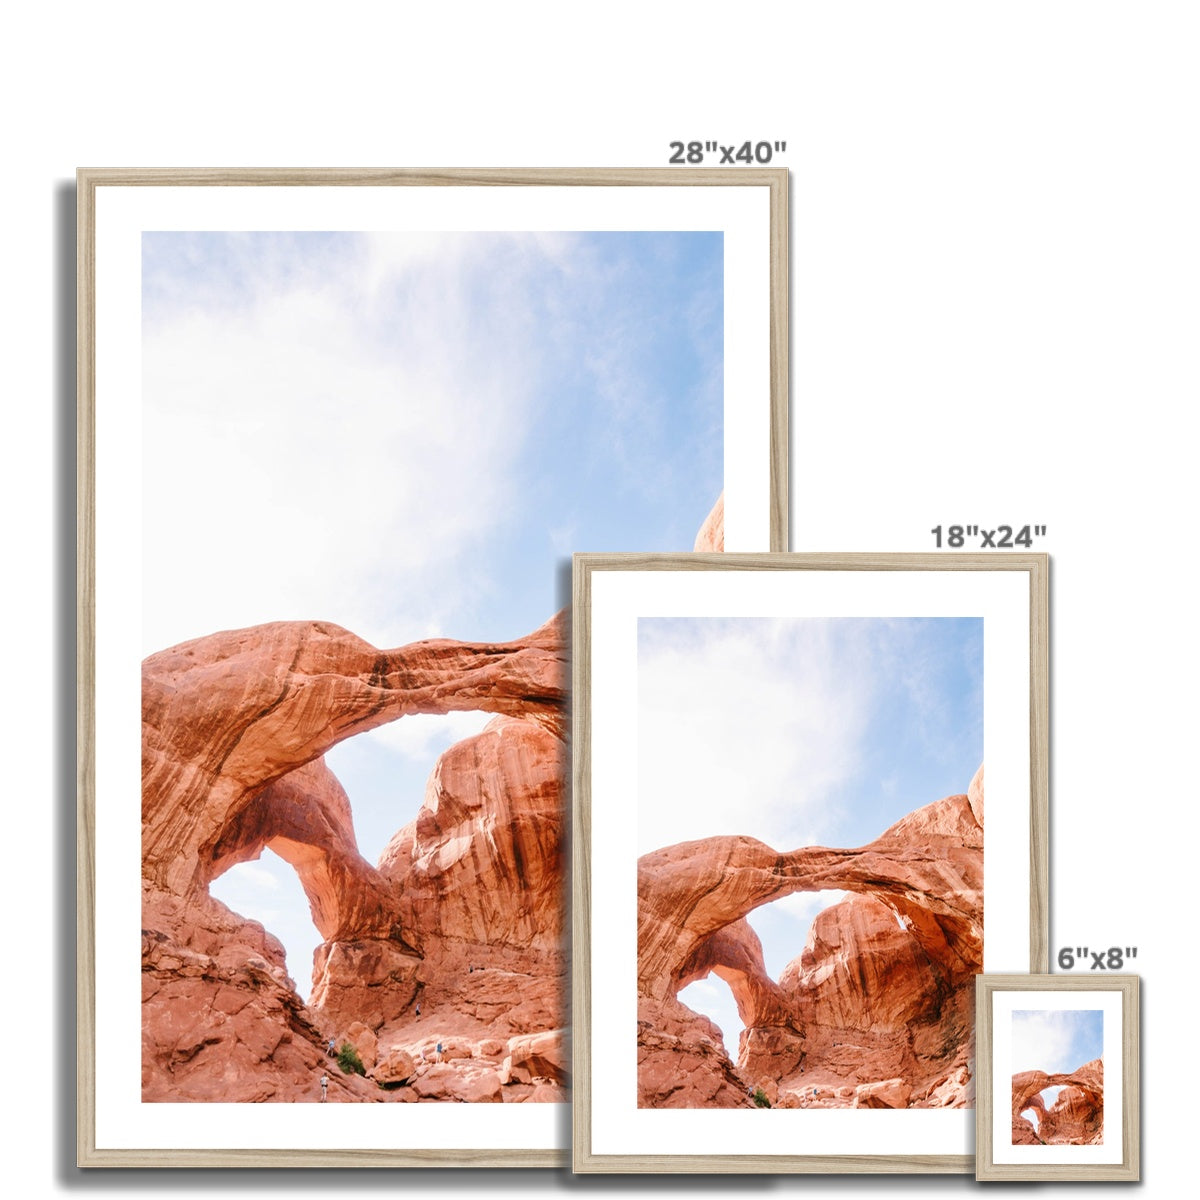 DOUBLE ARCHES II Framed & Mounted Print